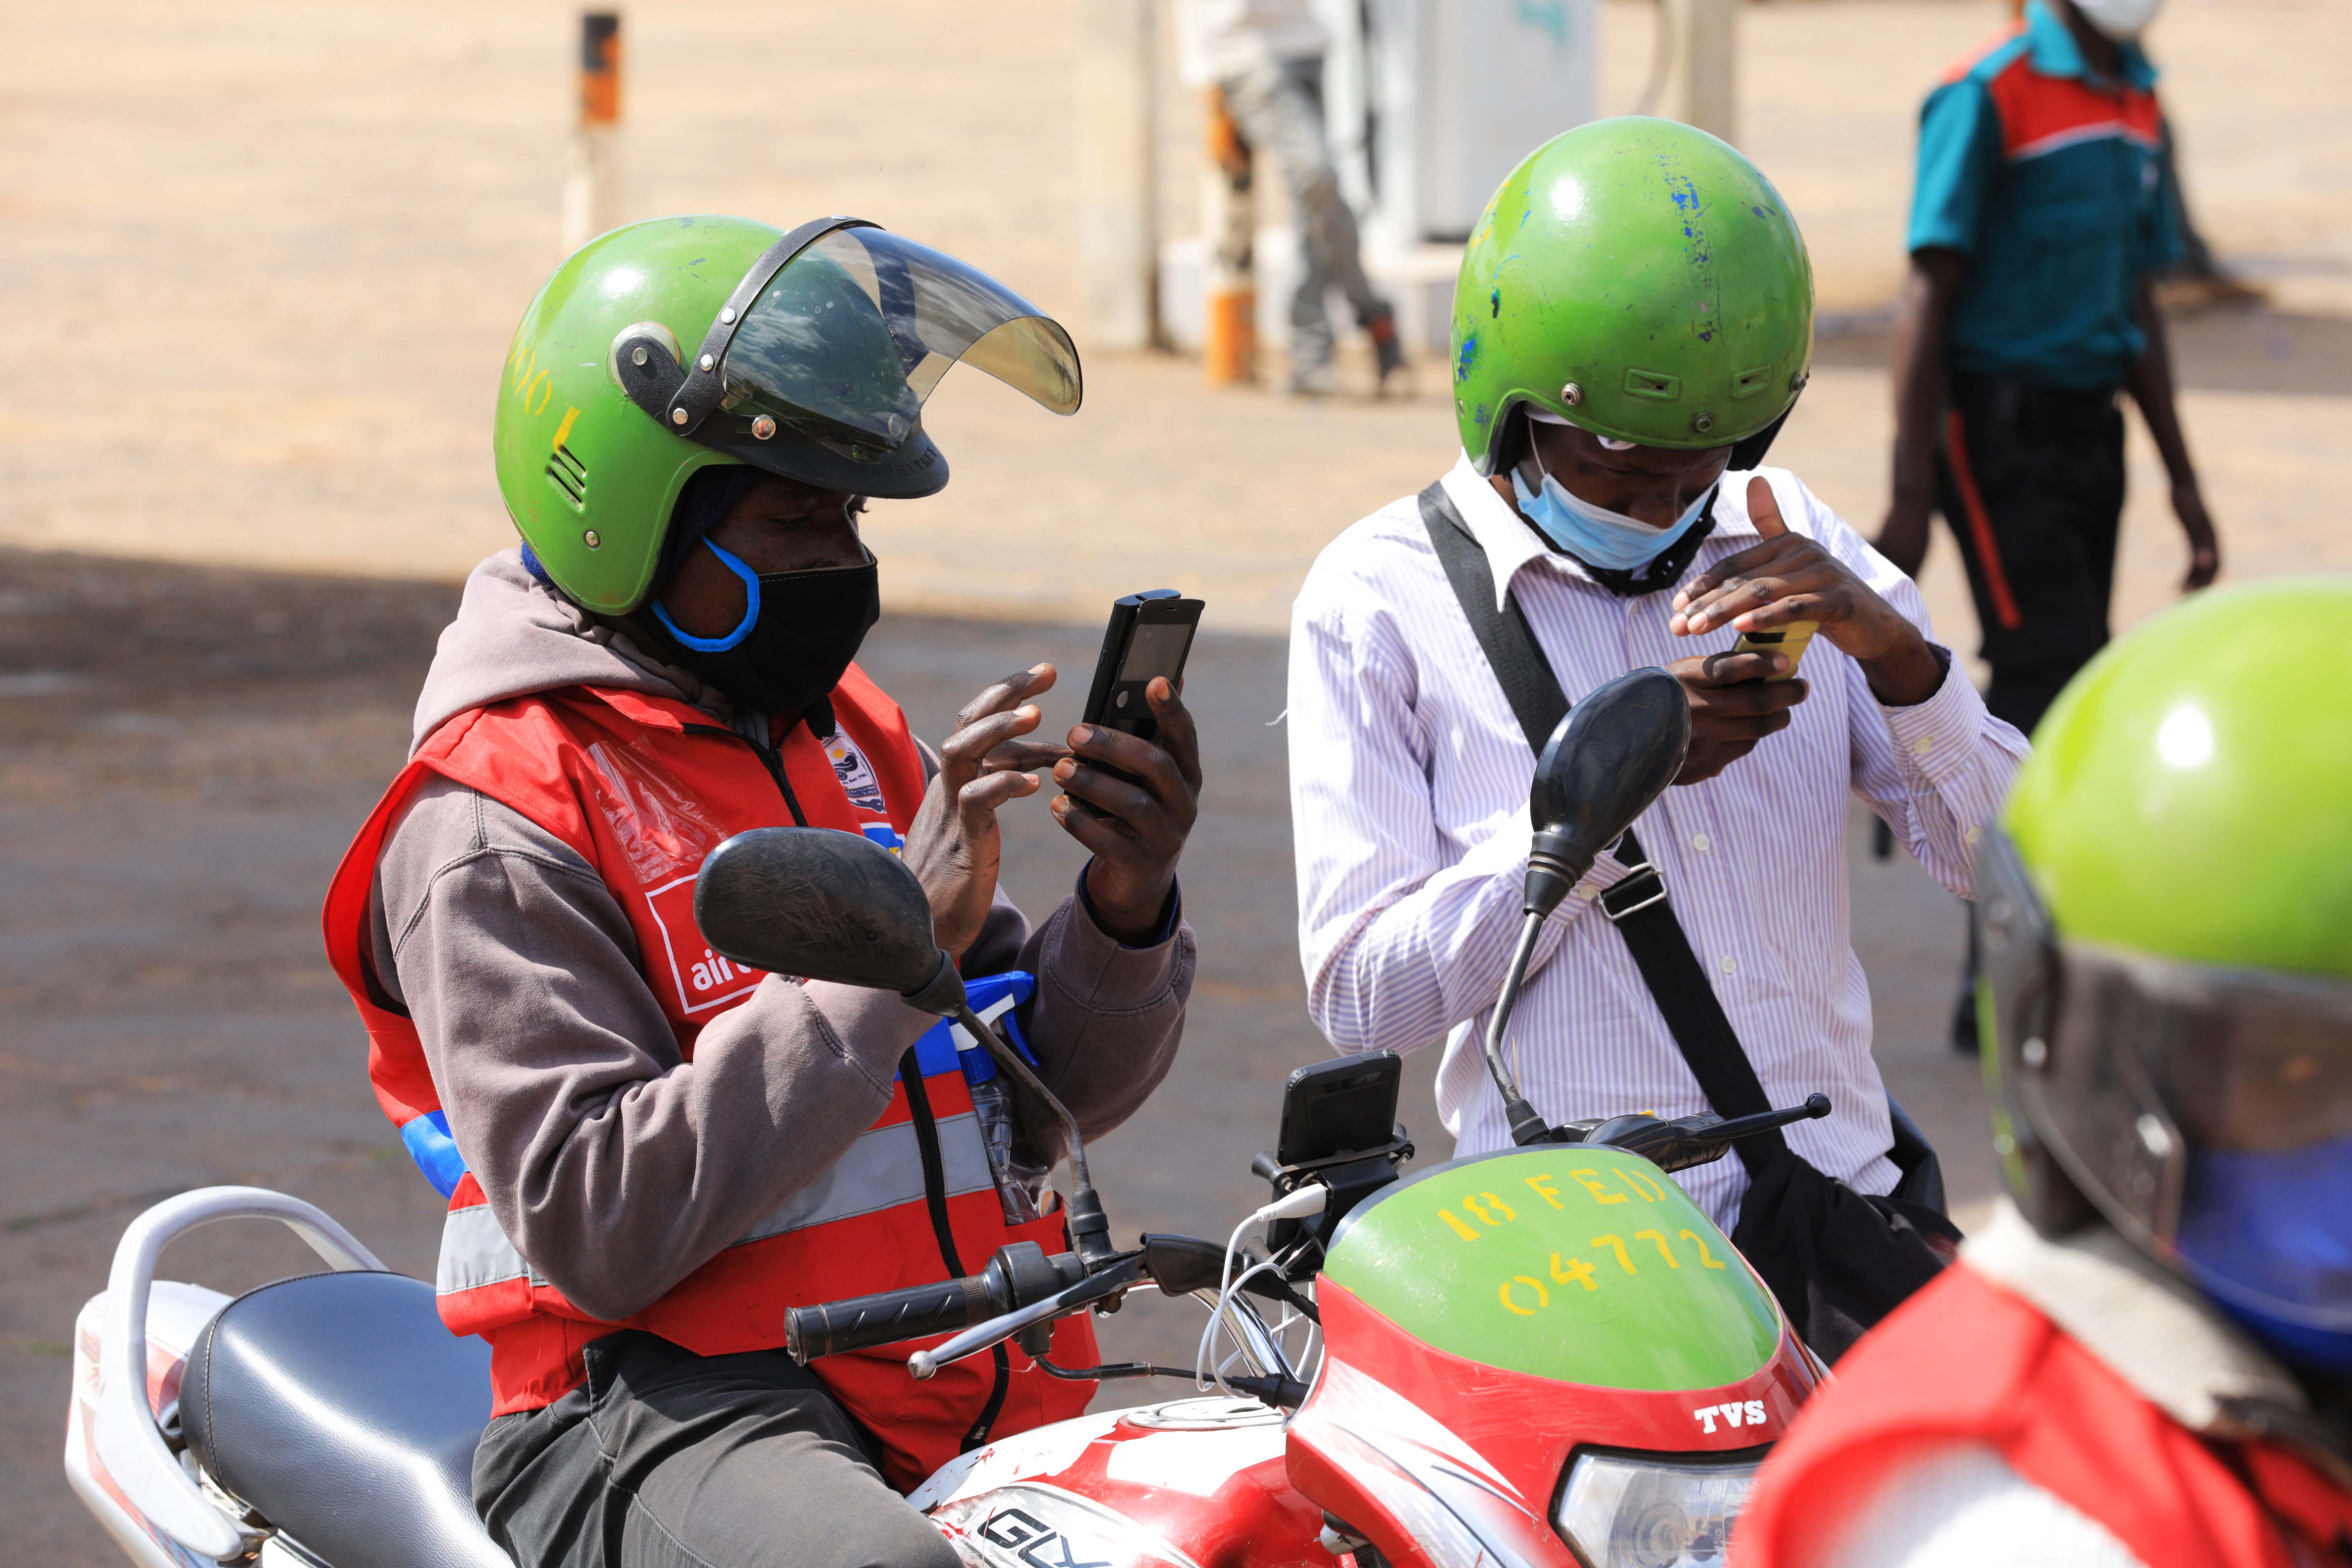 A passenger using mobile money to pay for his ride on a taxi moto in Kigali. The discrepancies in costs to pull money from oneu2019s bank account to their mobile money wallet threatens to set the country back on gains made towards cashless payments.